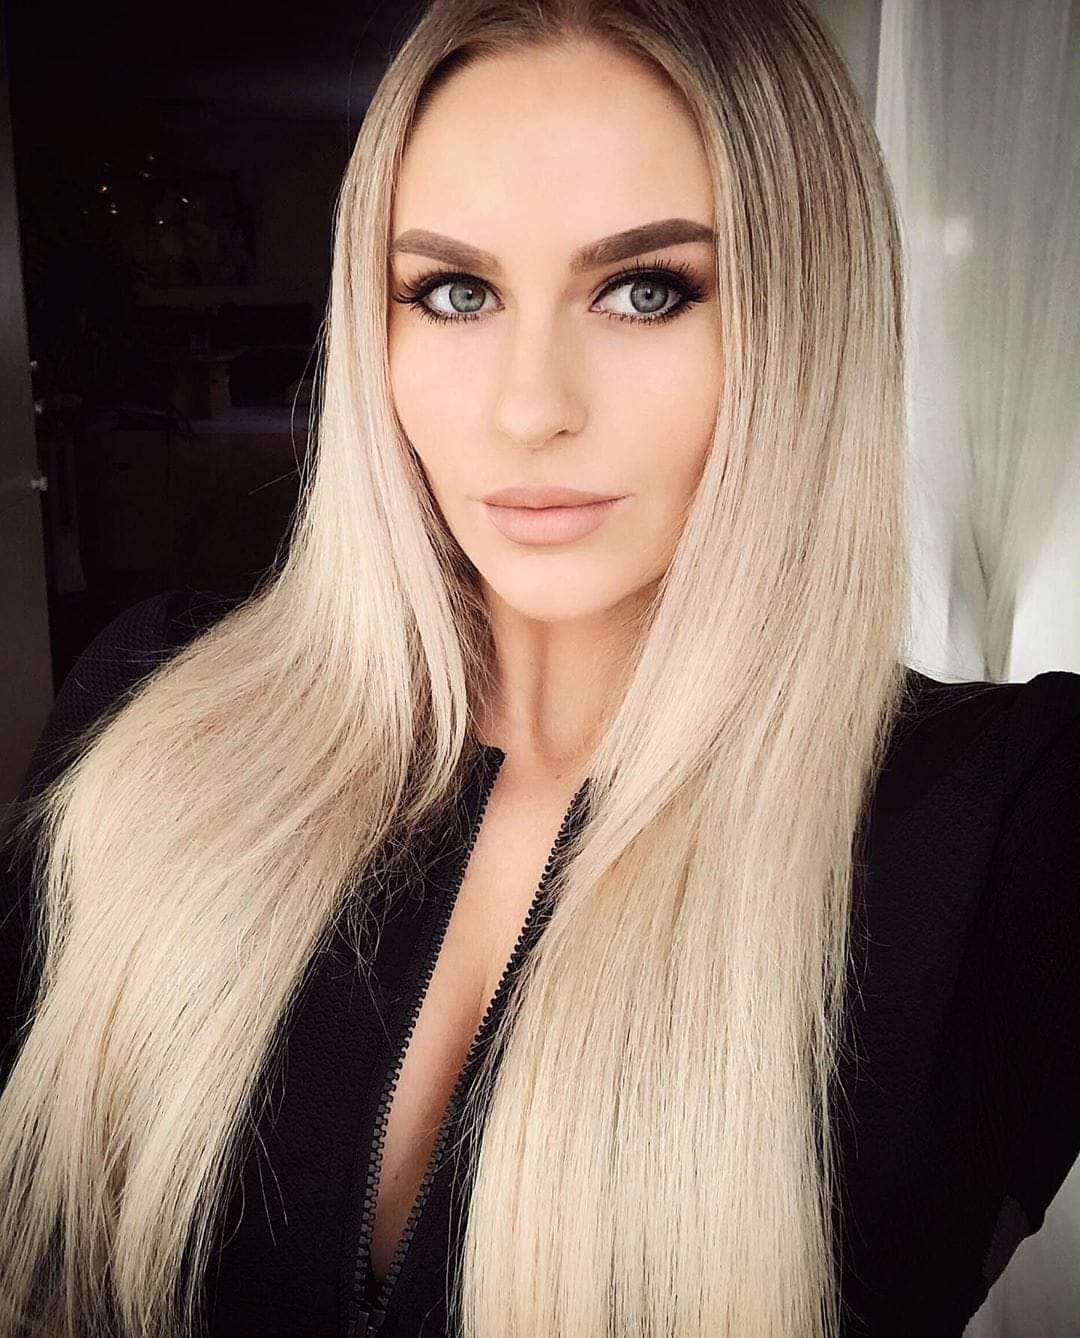 Anna Nystrom Biography; Net Worth, Age And YouTube - ABTC